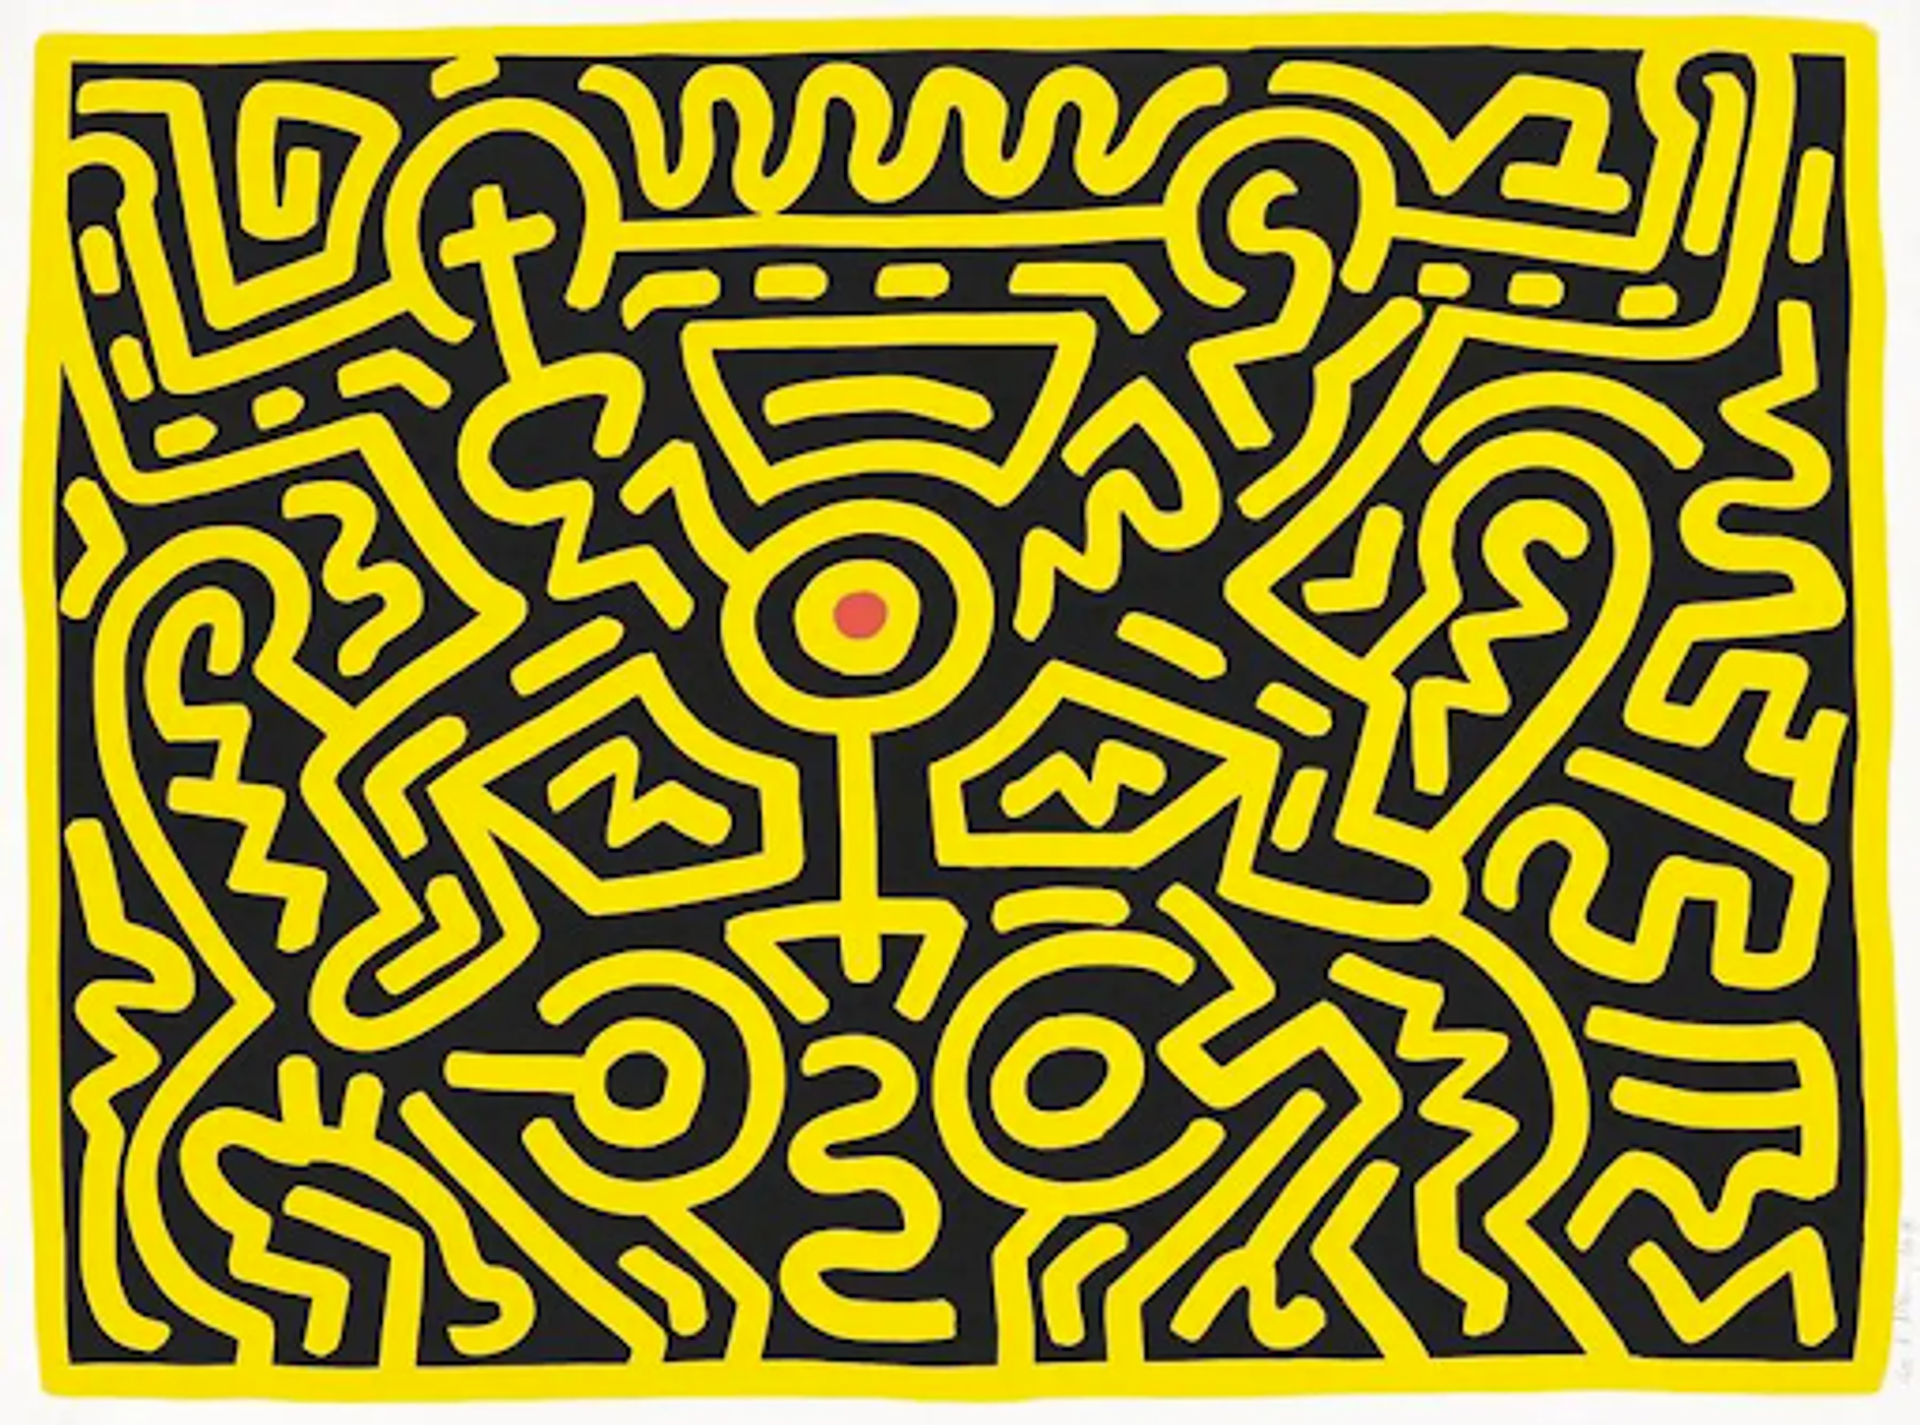 Keith Haring's Ode To Unity: An Interplay of Colour and Energy